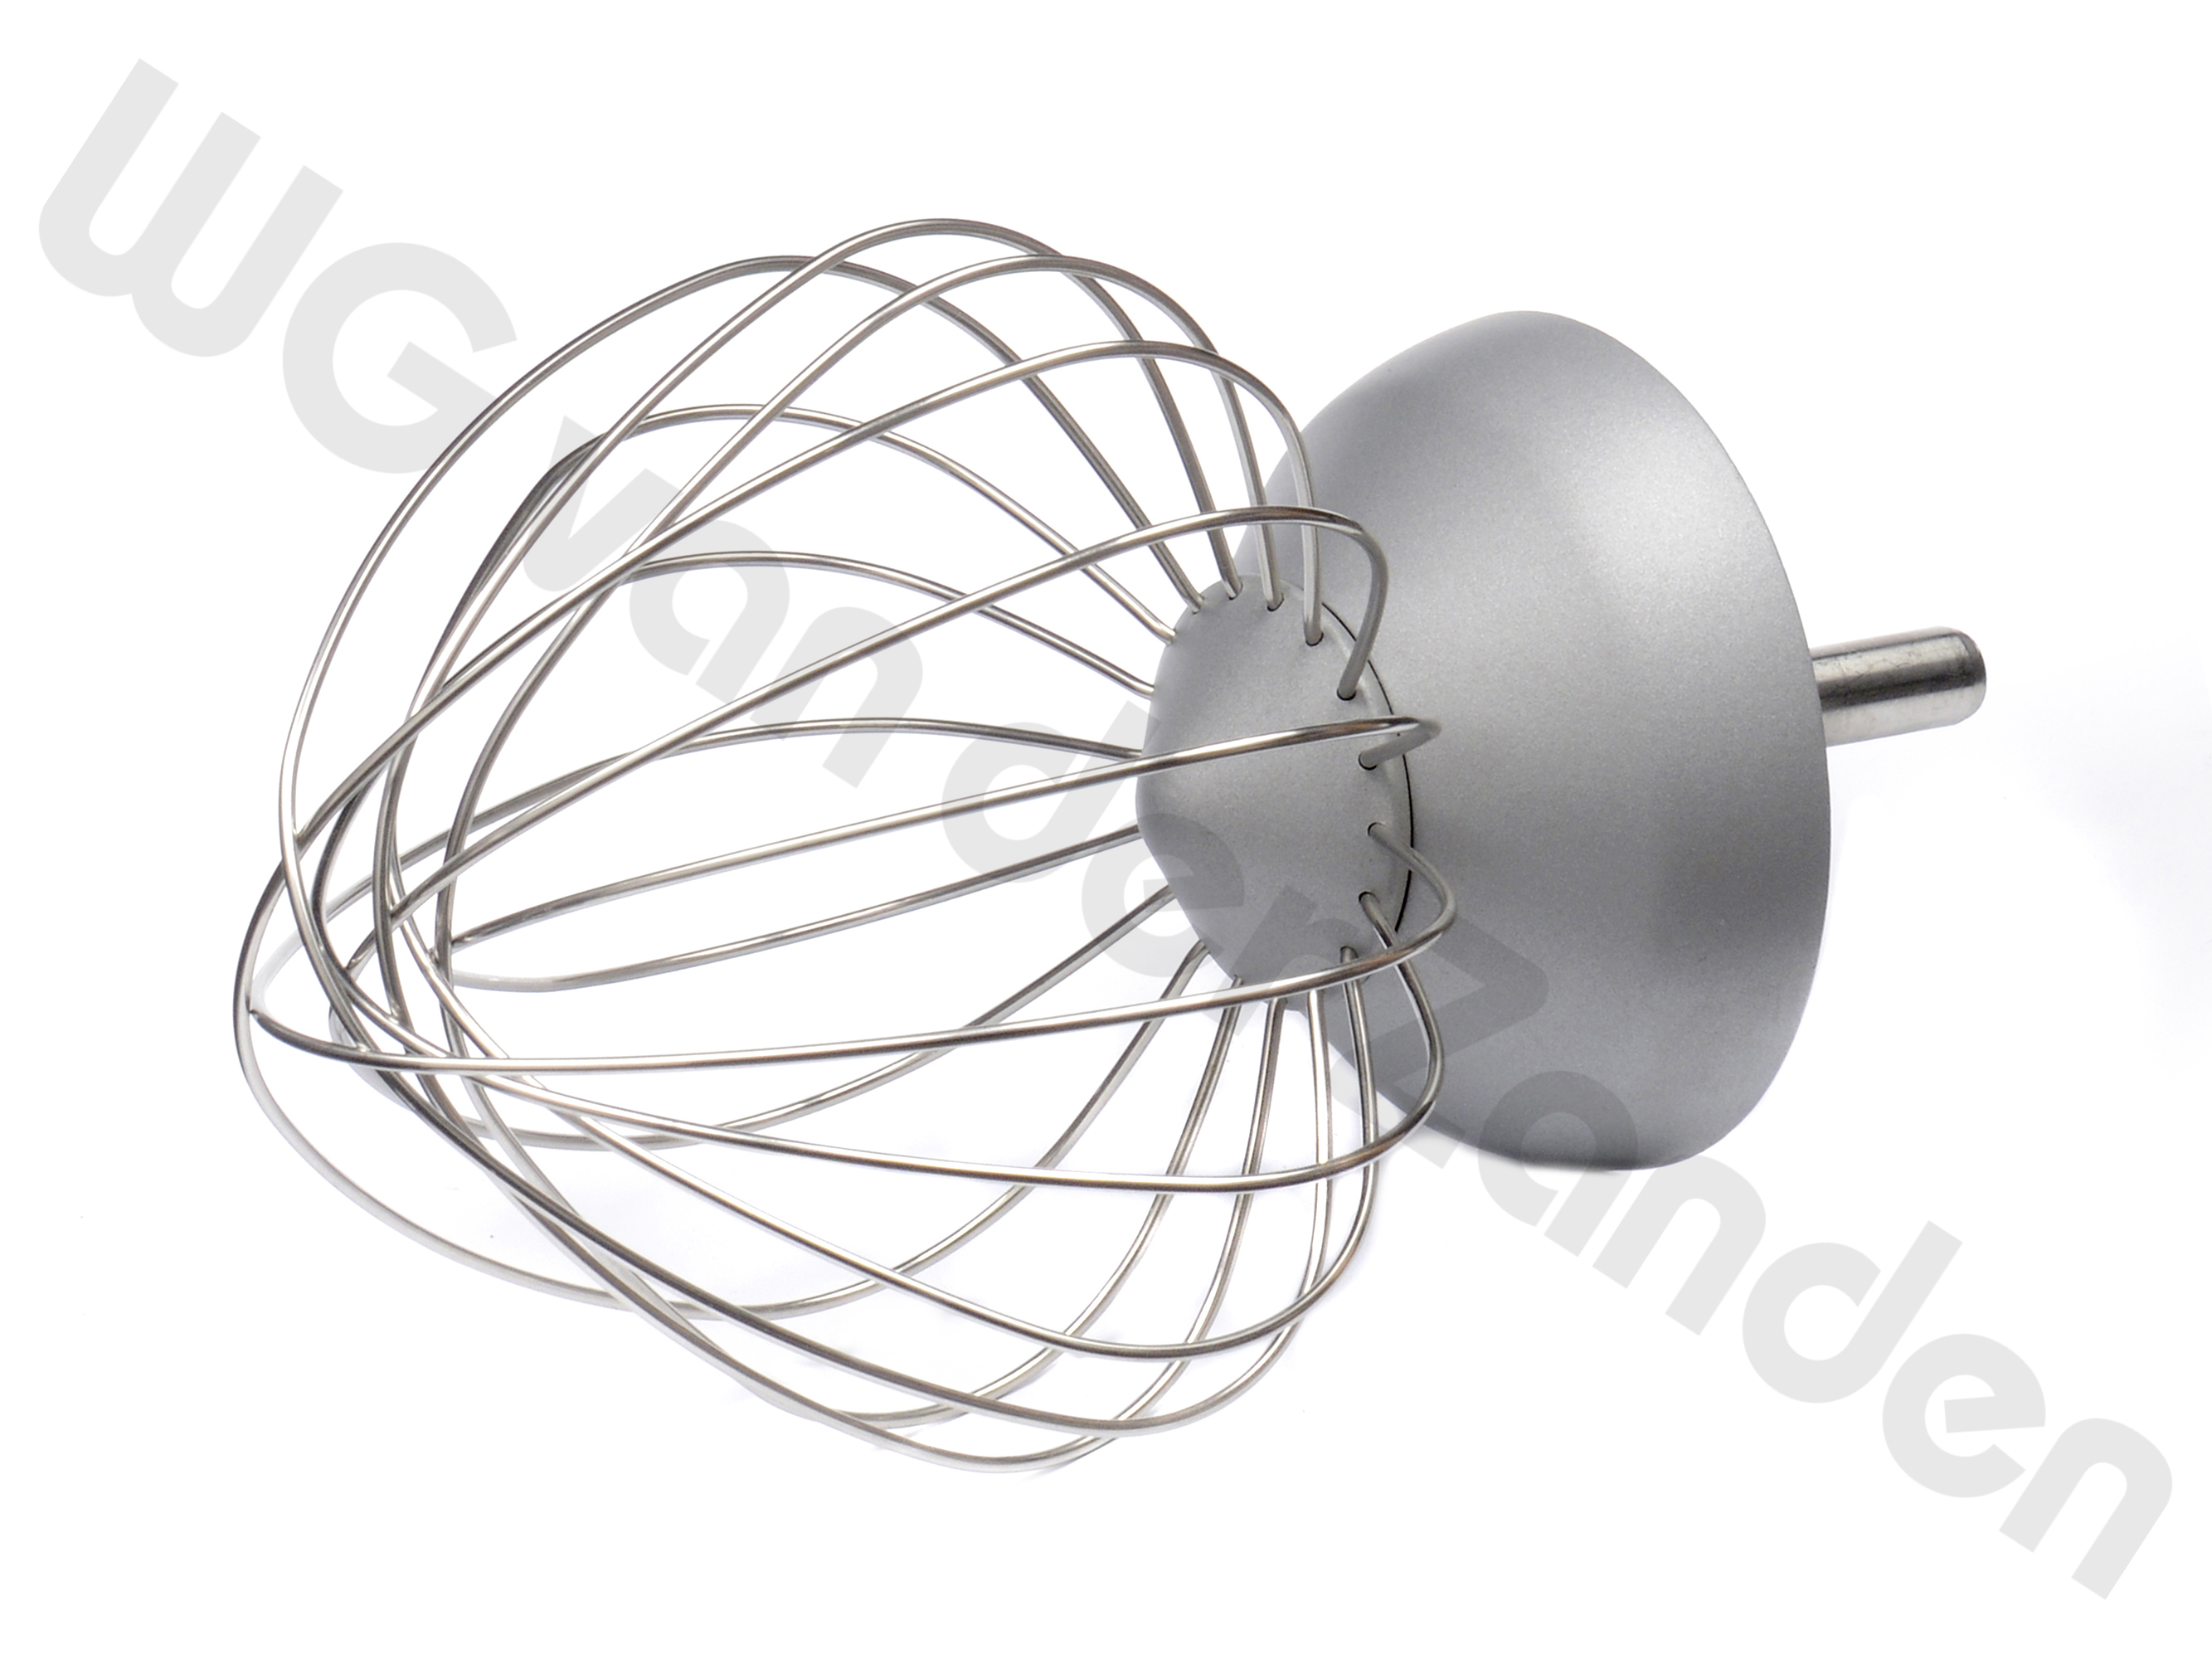 332068 KENWOOD BALOON WHISK FOR CHEF